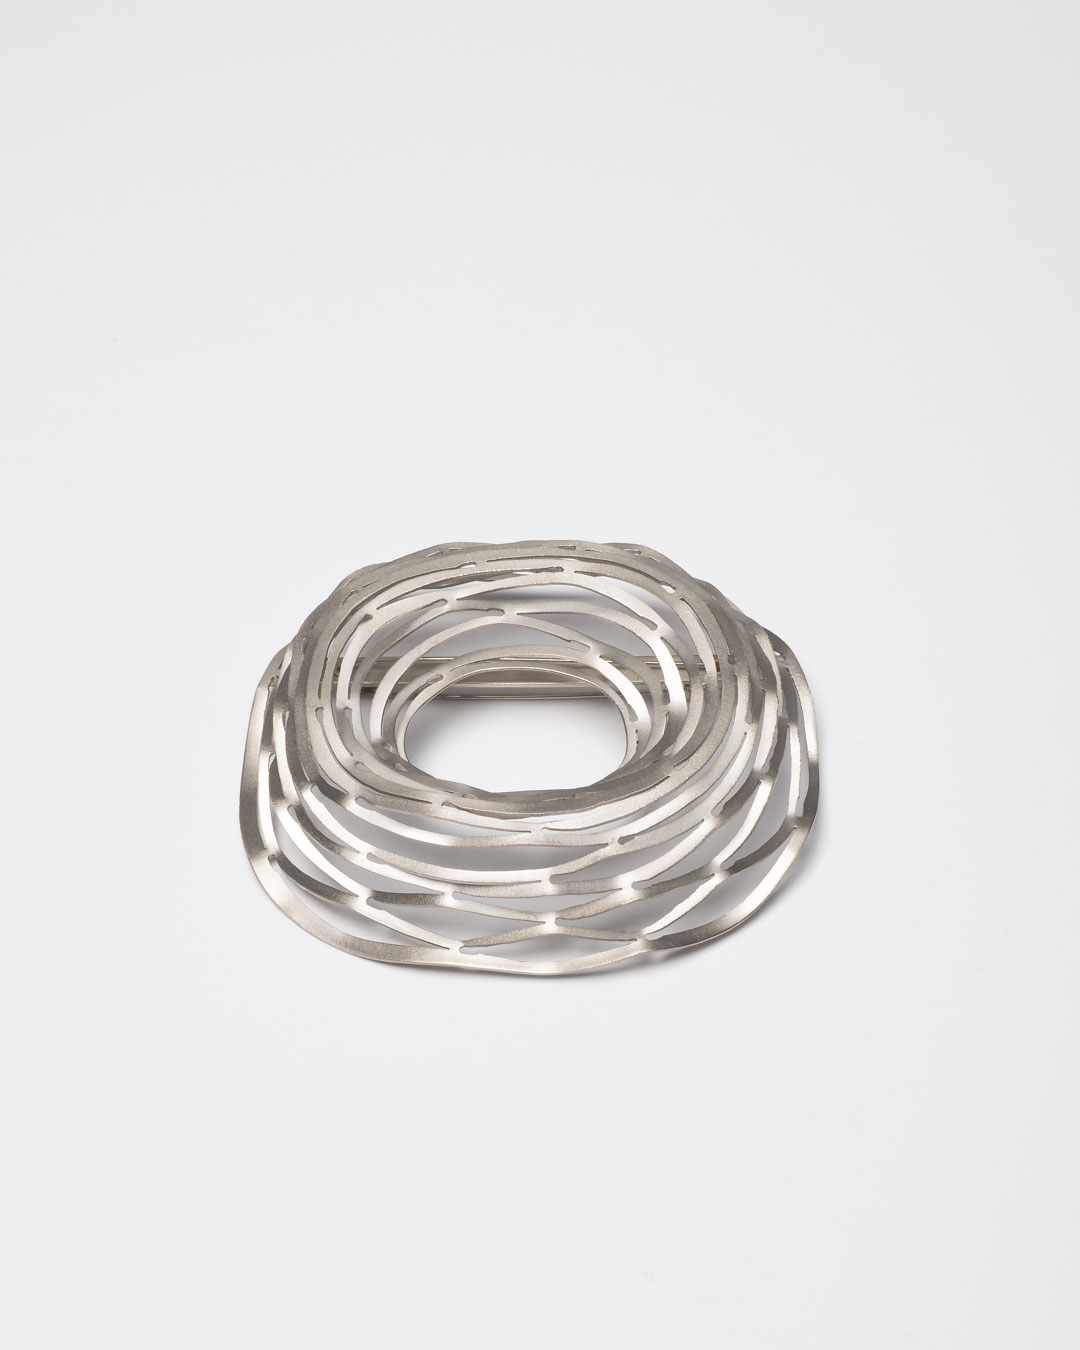 Antje Bräuer, untitled, 2010, brooch; titanium, gold, stainless steel, 65 x 77 x 21 mm, €535